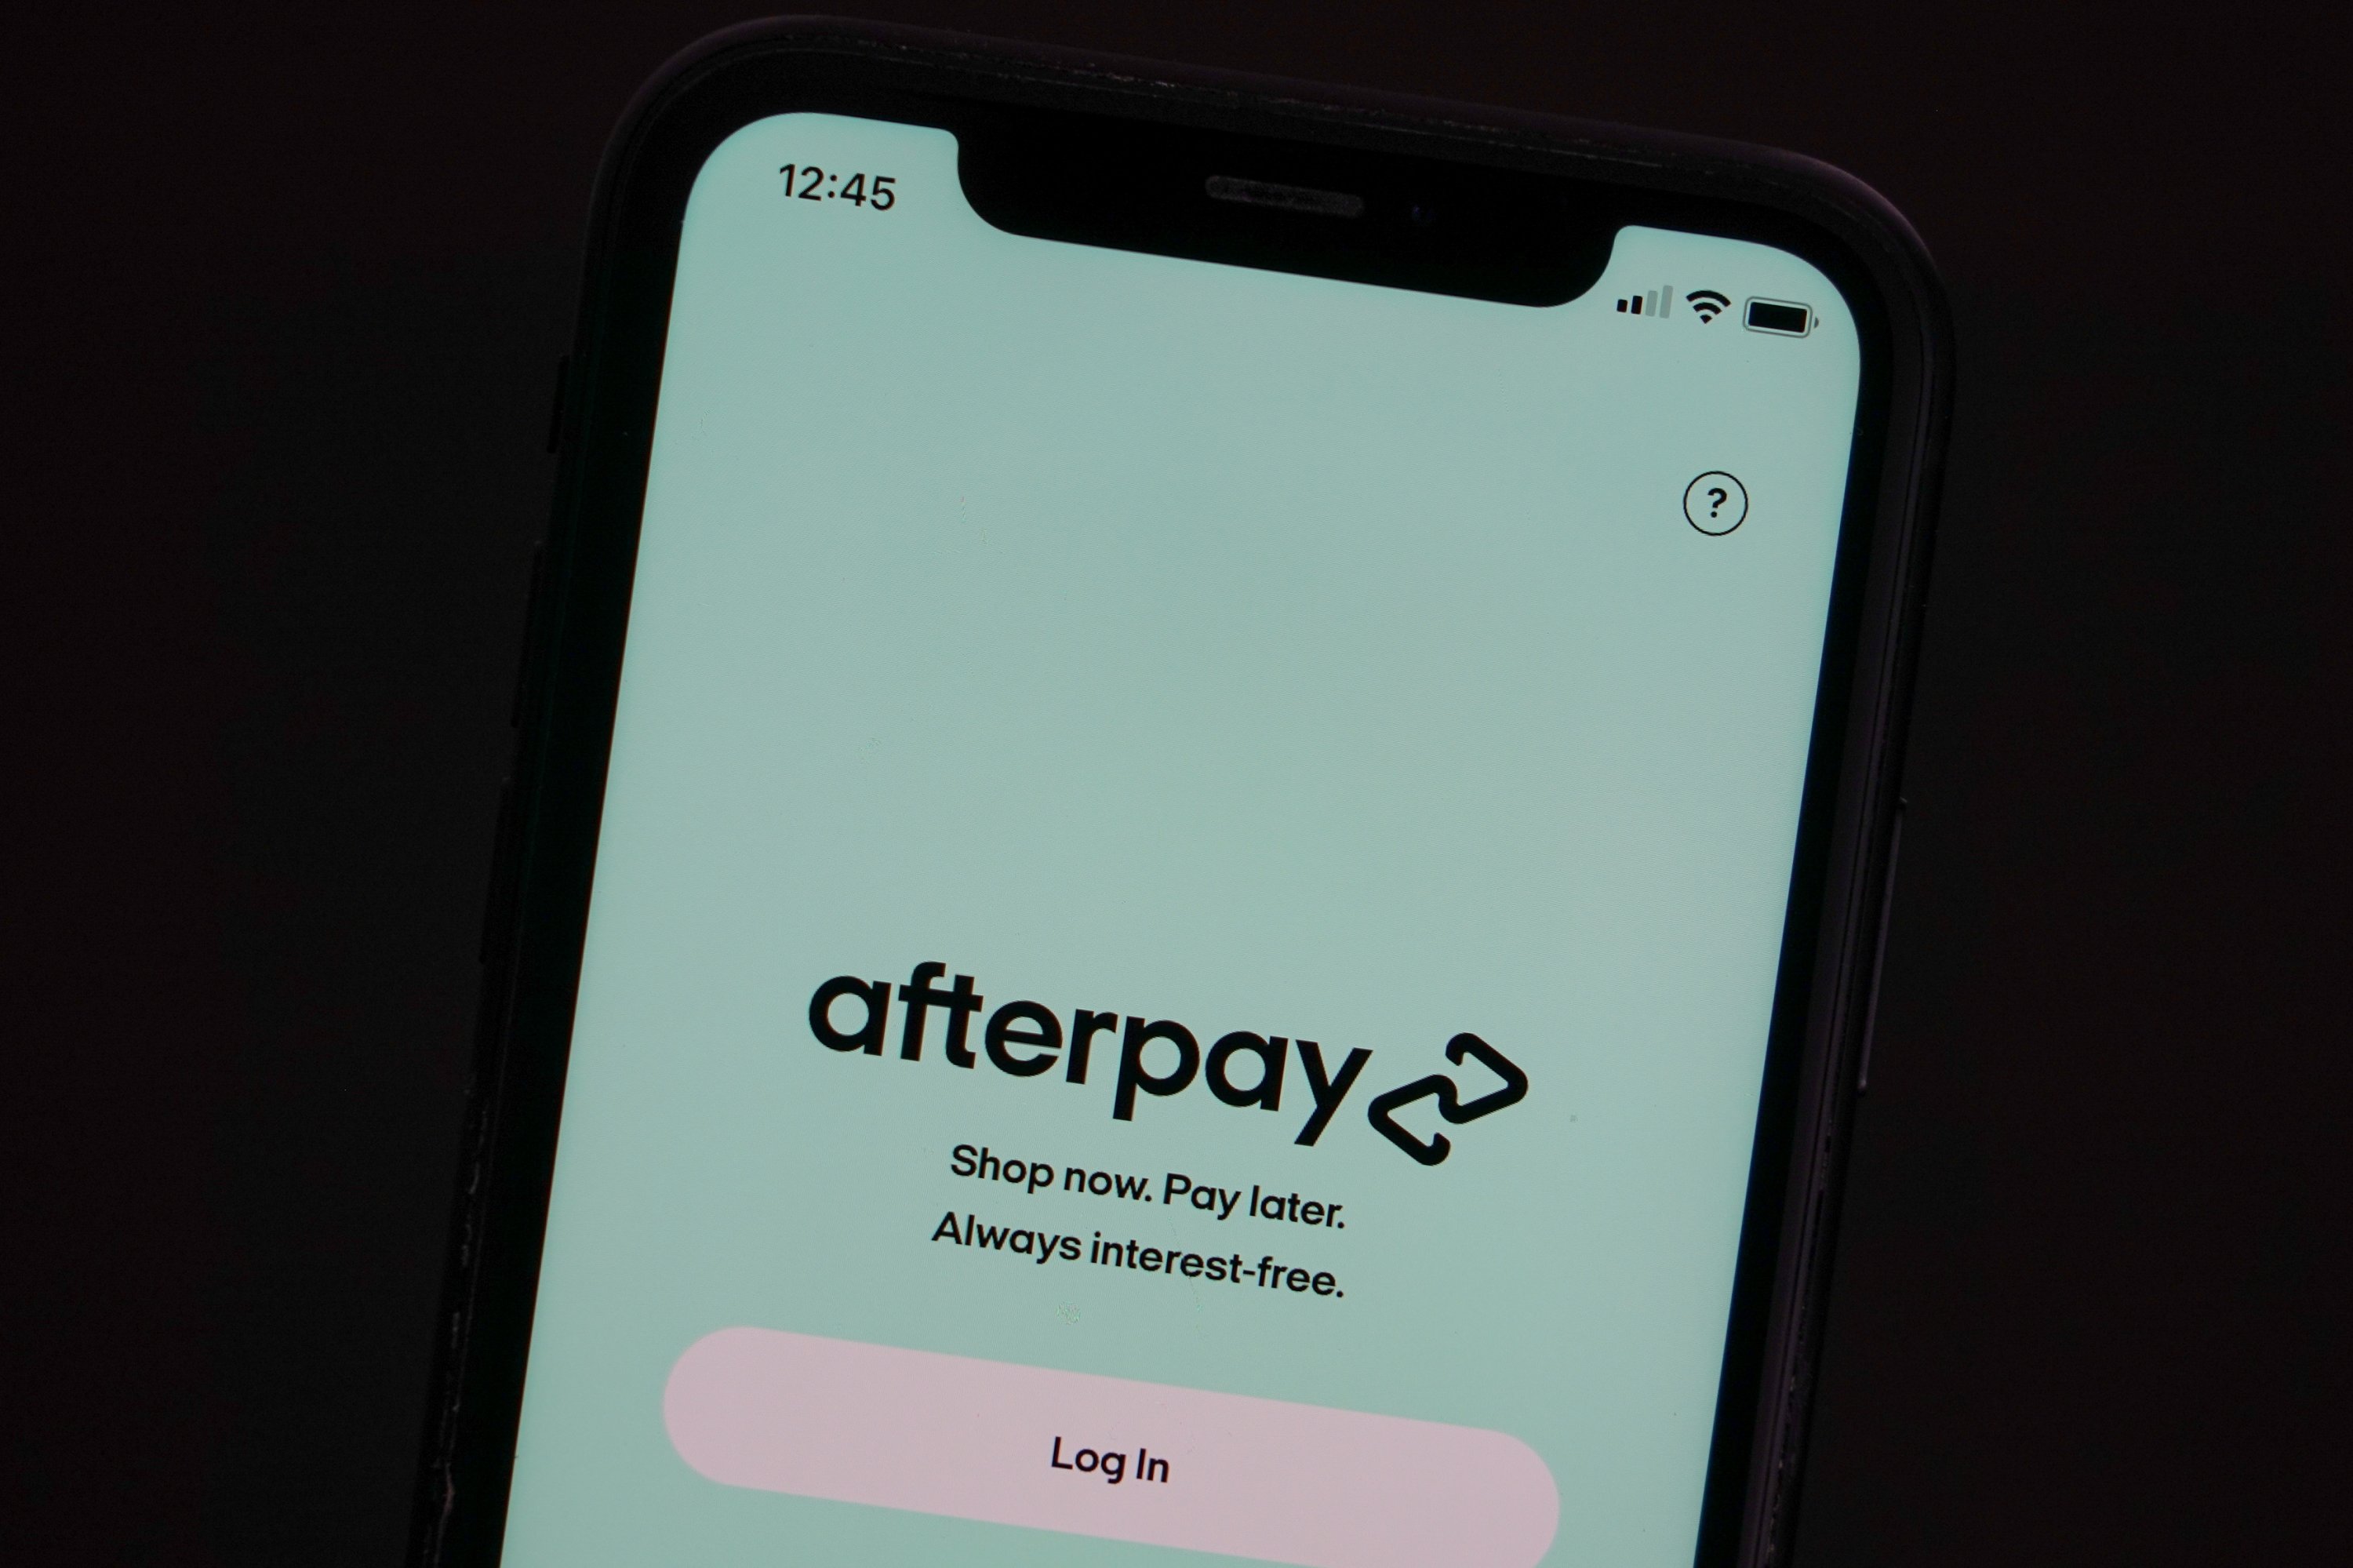 Dorsey's Square to buy Aussie fintech startup Afterpay for $29B